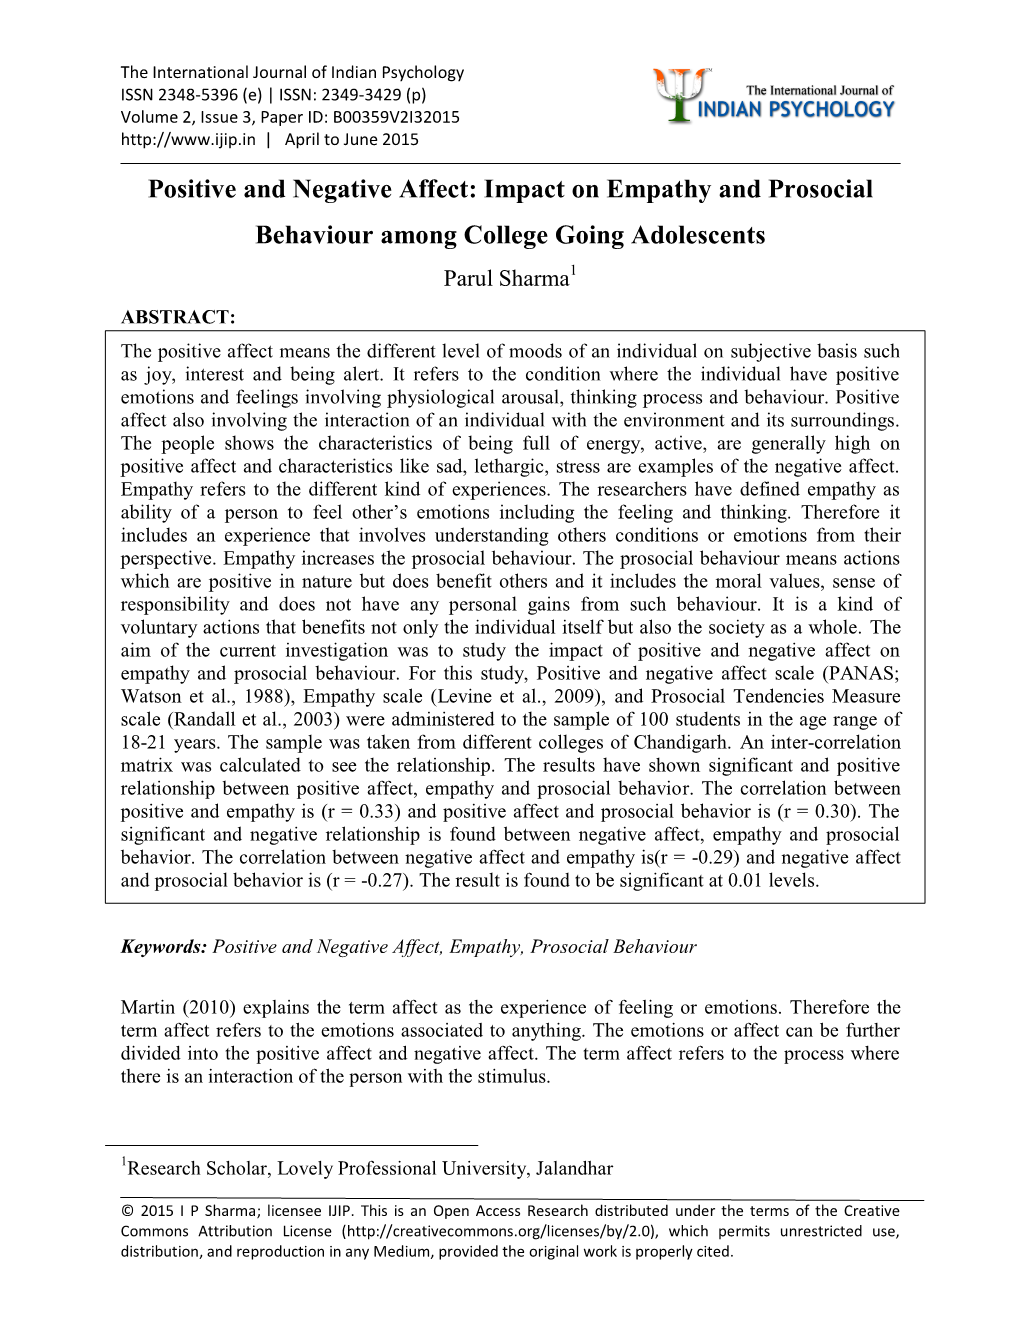 Impact on Empathy and Prosocial Behaviour Among College Going